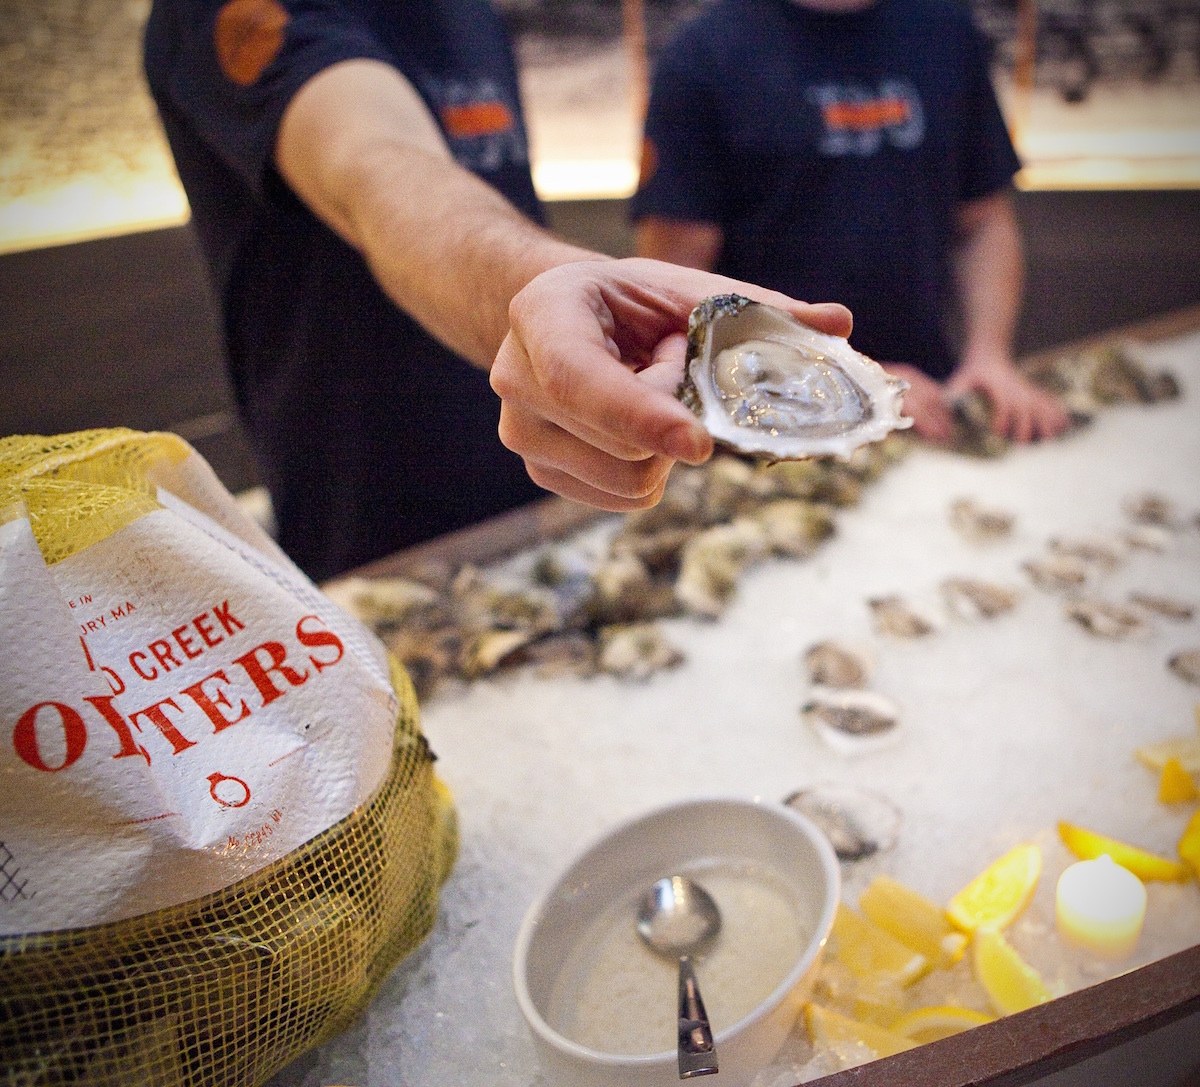 These Mail-Order Oysters Make Home-Dining Feel Special 